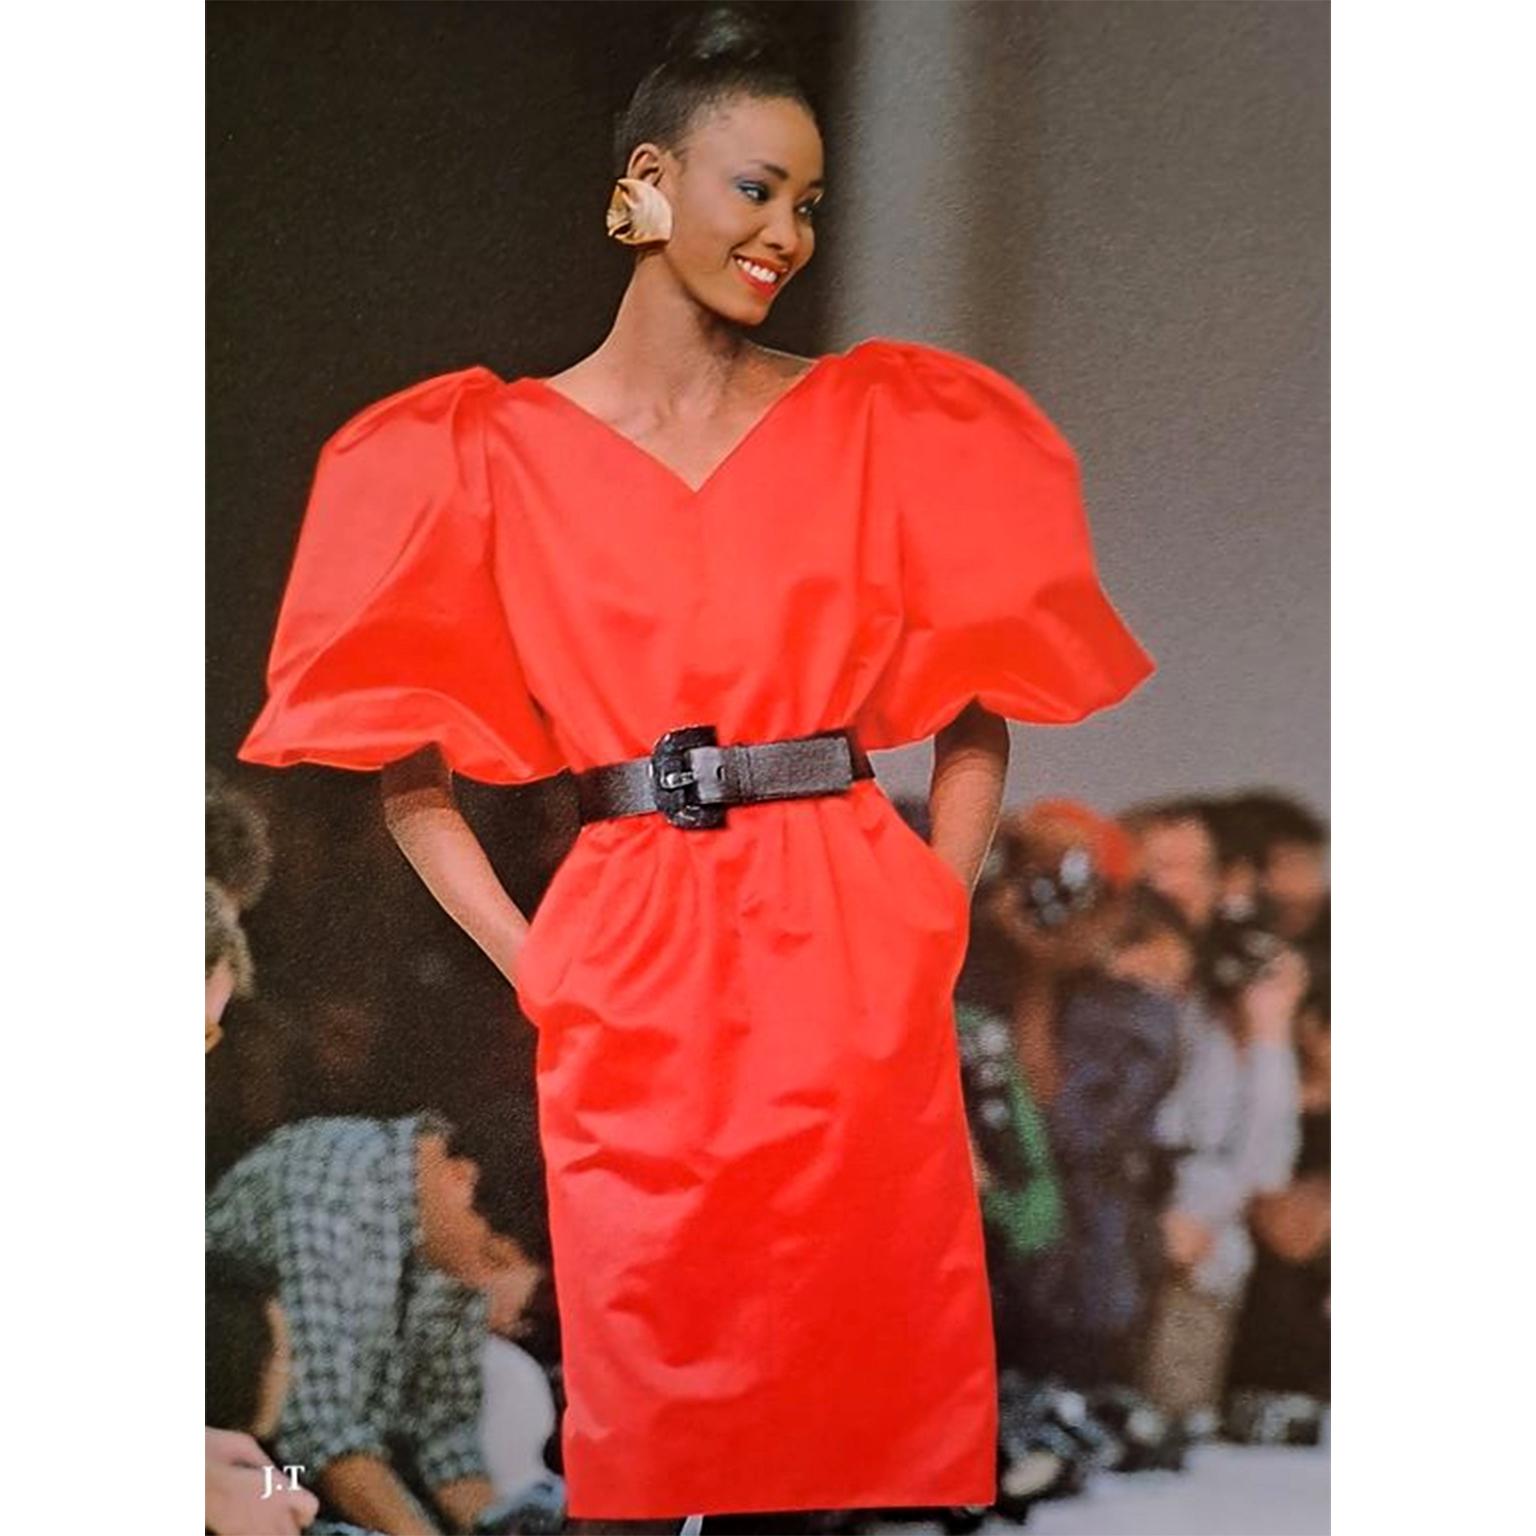 This stunning vintage Yves Saint Laurent red dress was featured on the YSL runway. for the Spring Summer 1989 collection. This fabulous dress is in a luxe red cotton fabric and has the signature YSL puff sleeves with beautiful gathering at the